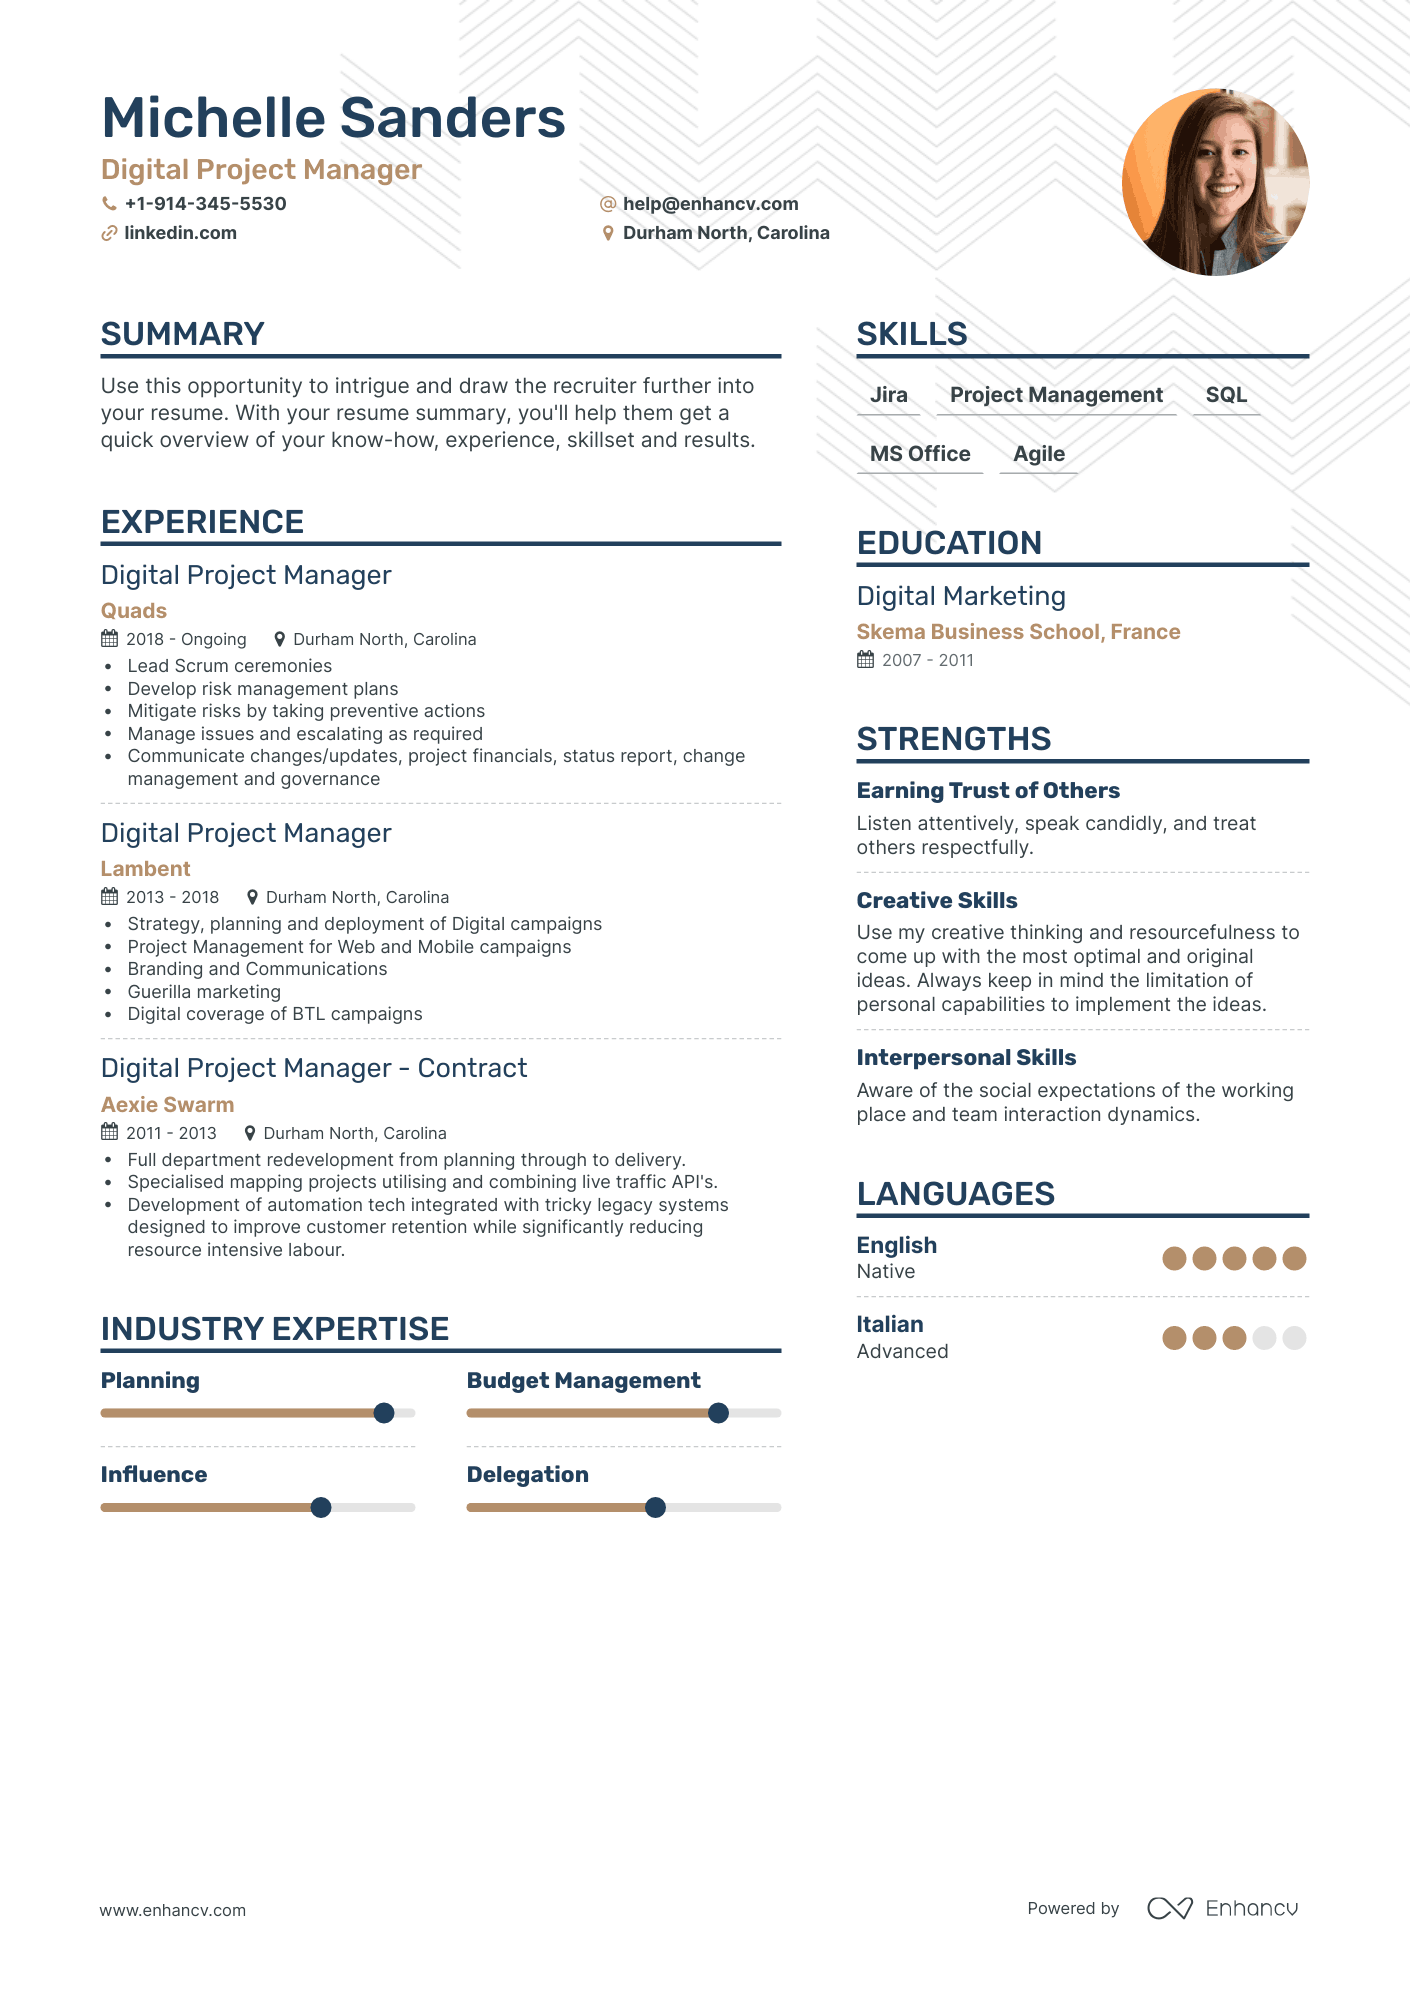 Digital Project Manager Resume Examples & Guide for 2023 (Layout ...